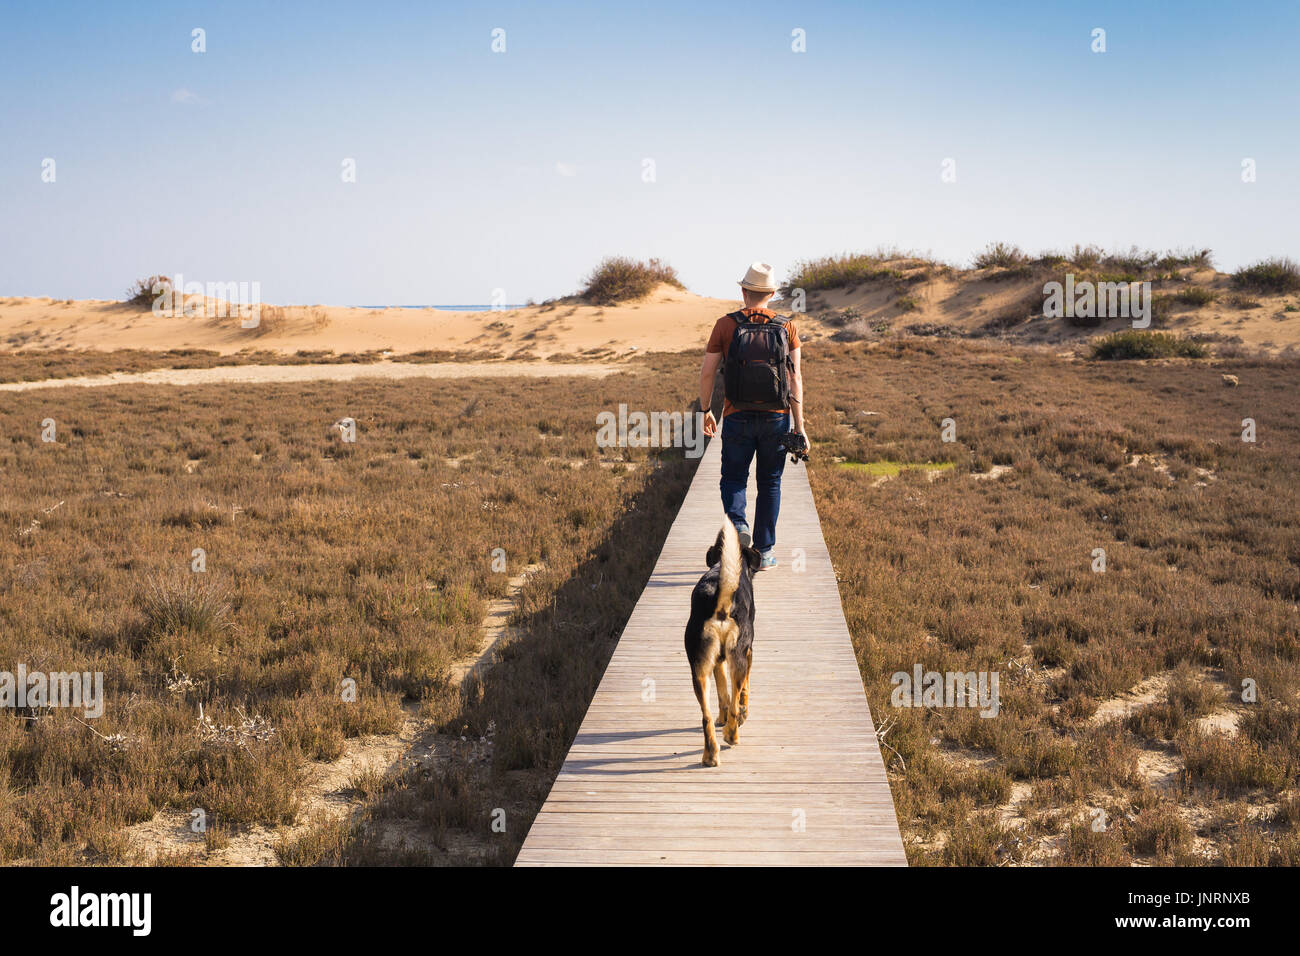 Outdoors lifestyle image of travelling man with cute dog. Tourism concept. Stock Photo